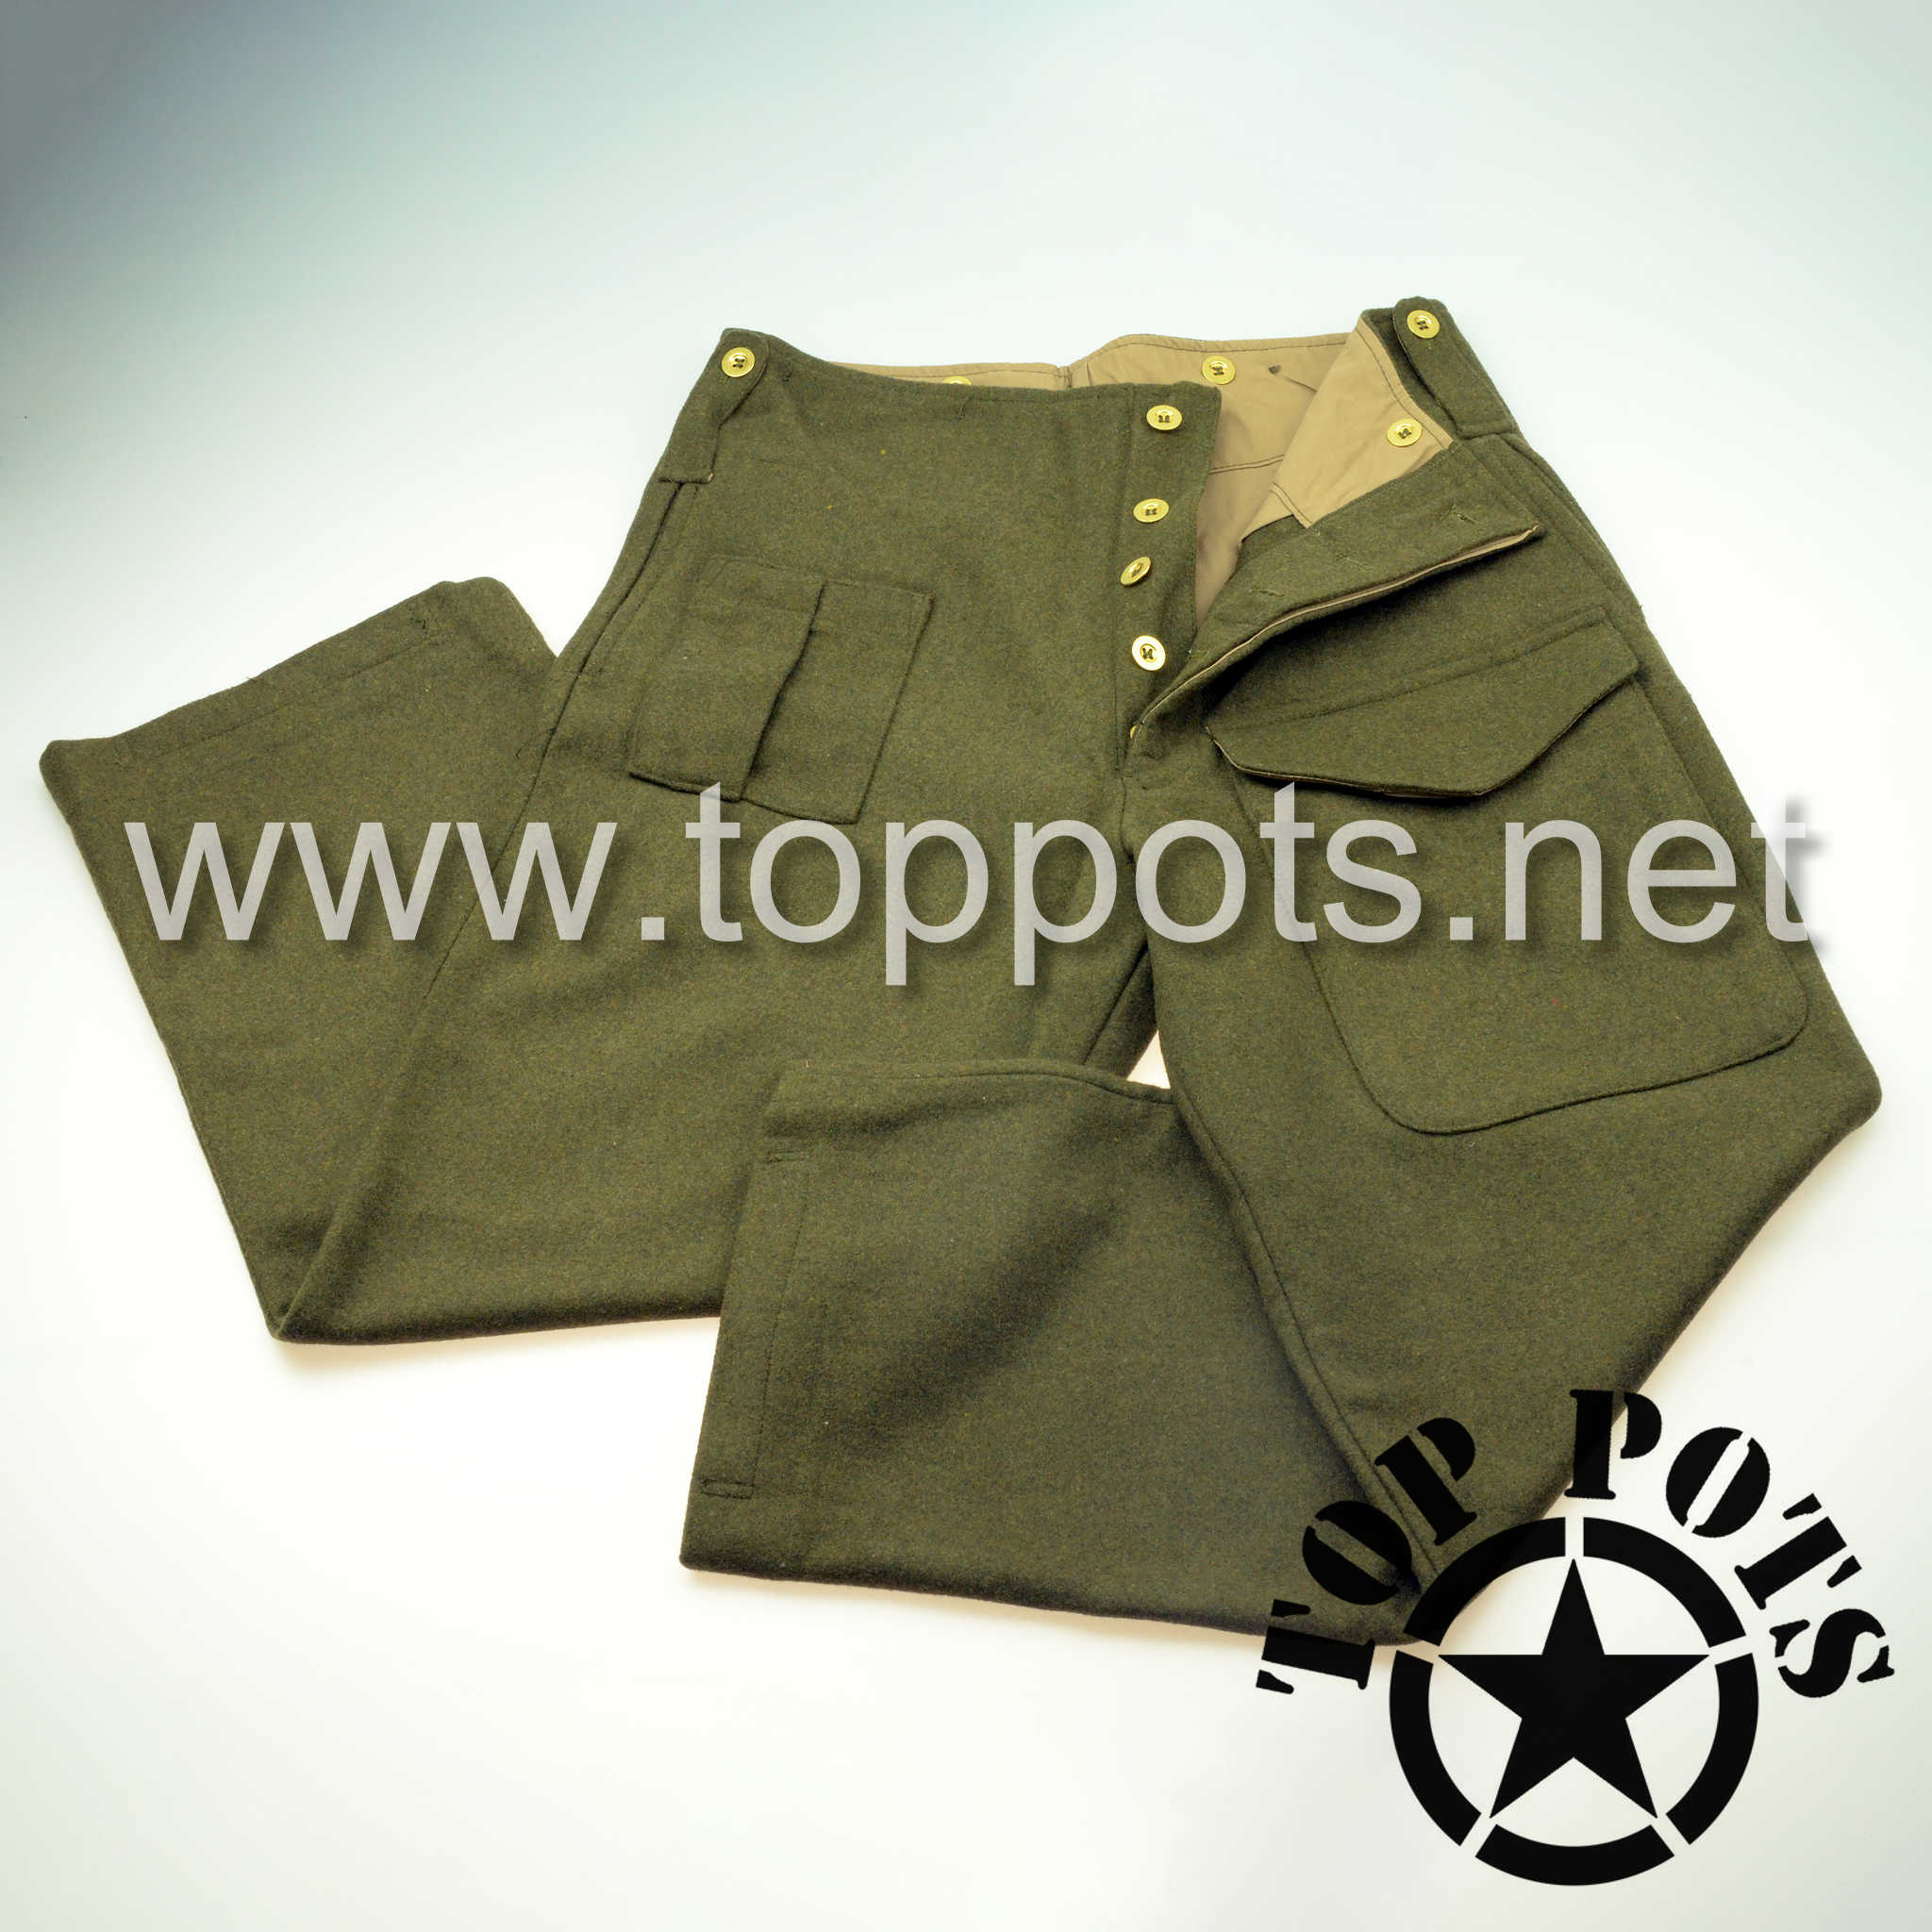 WWII Canadian Army Reproduction M1937 P37 Wool Enlisted Uniform Battle -  Top Pots - WWII US M-1 Helmets, Liners and Reproduction Uniform Sales